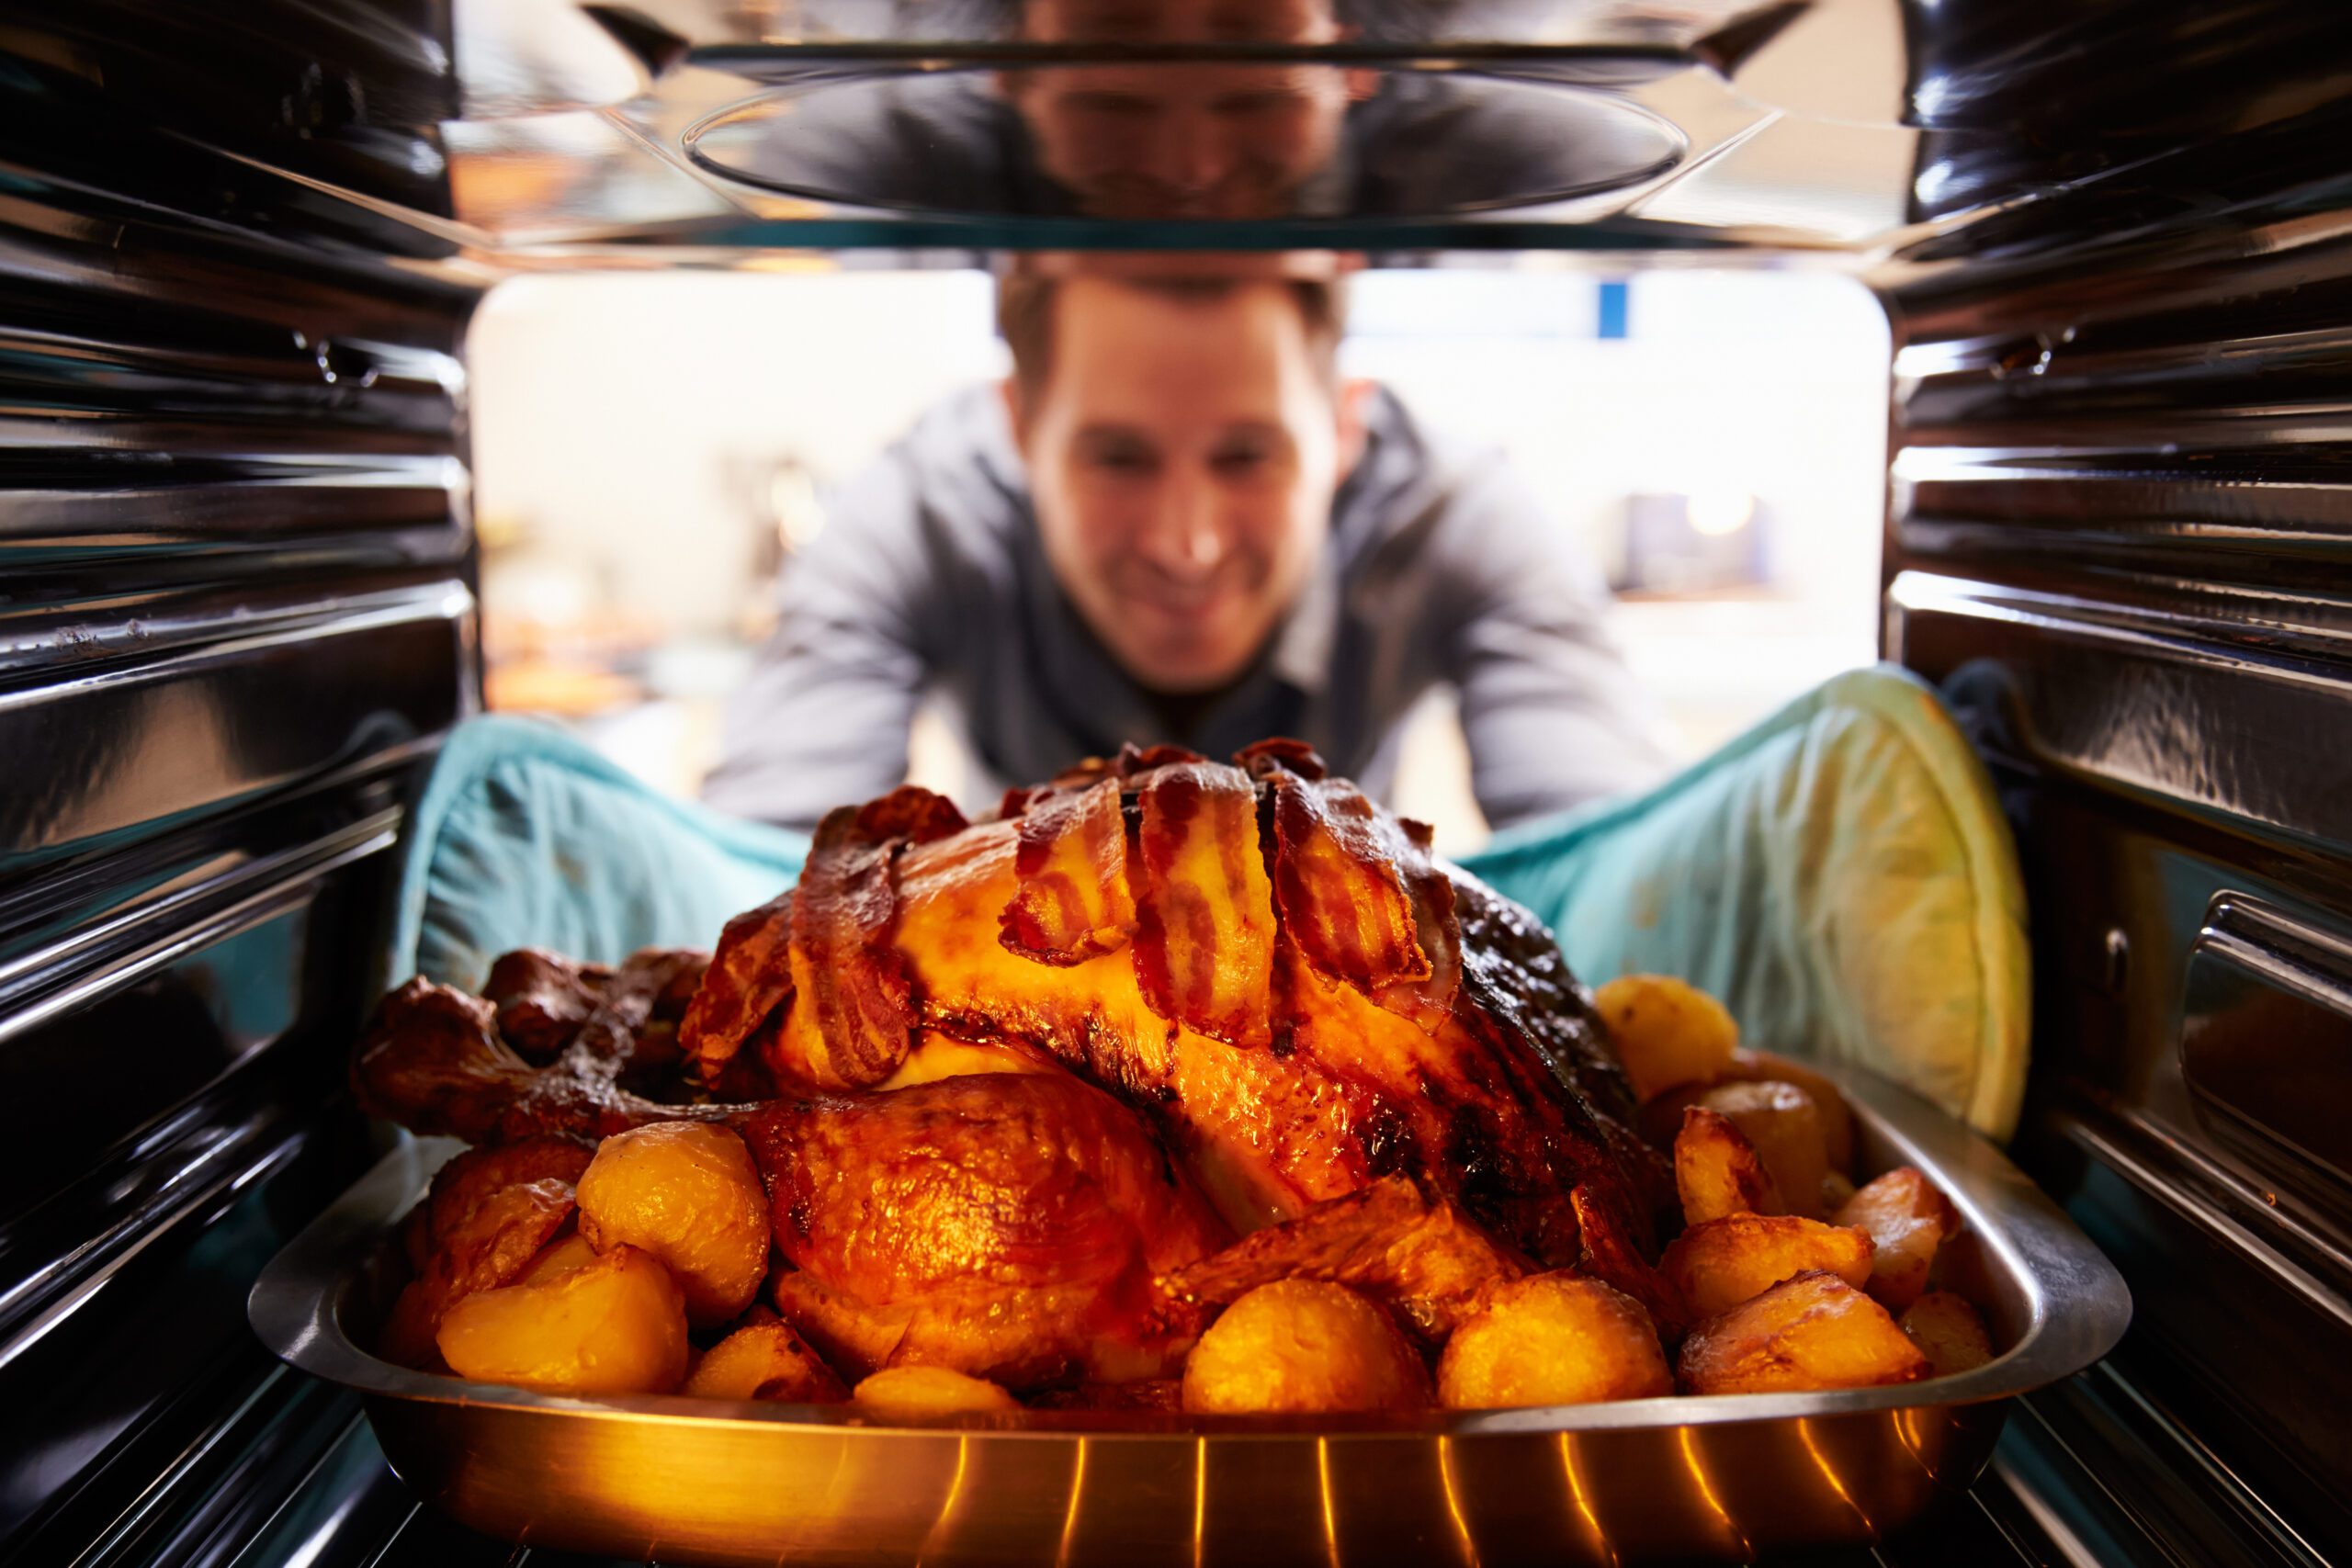 Cook safely during Thanksgiving and the holiday season